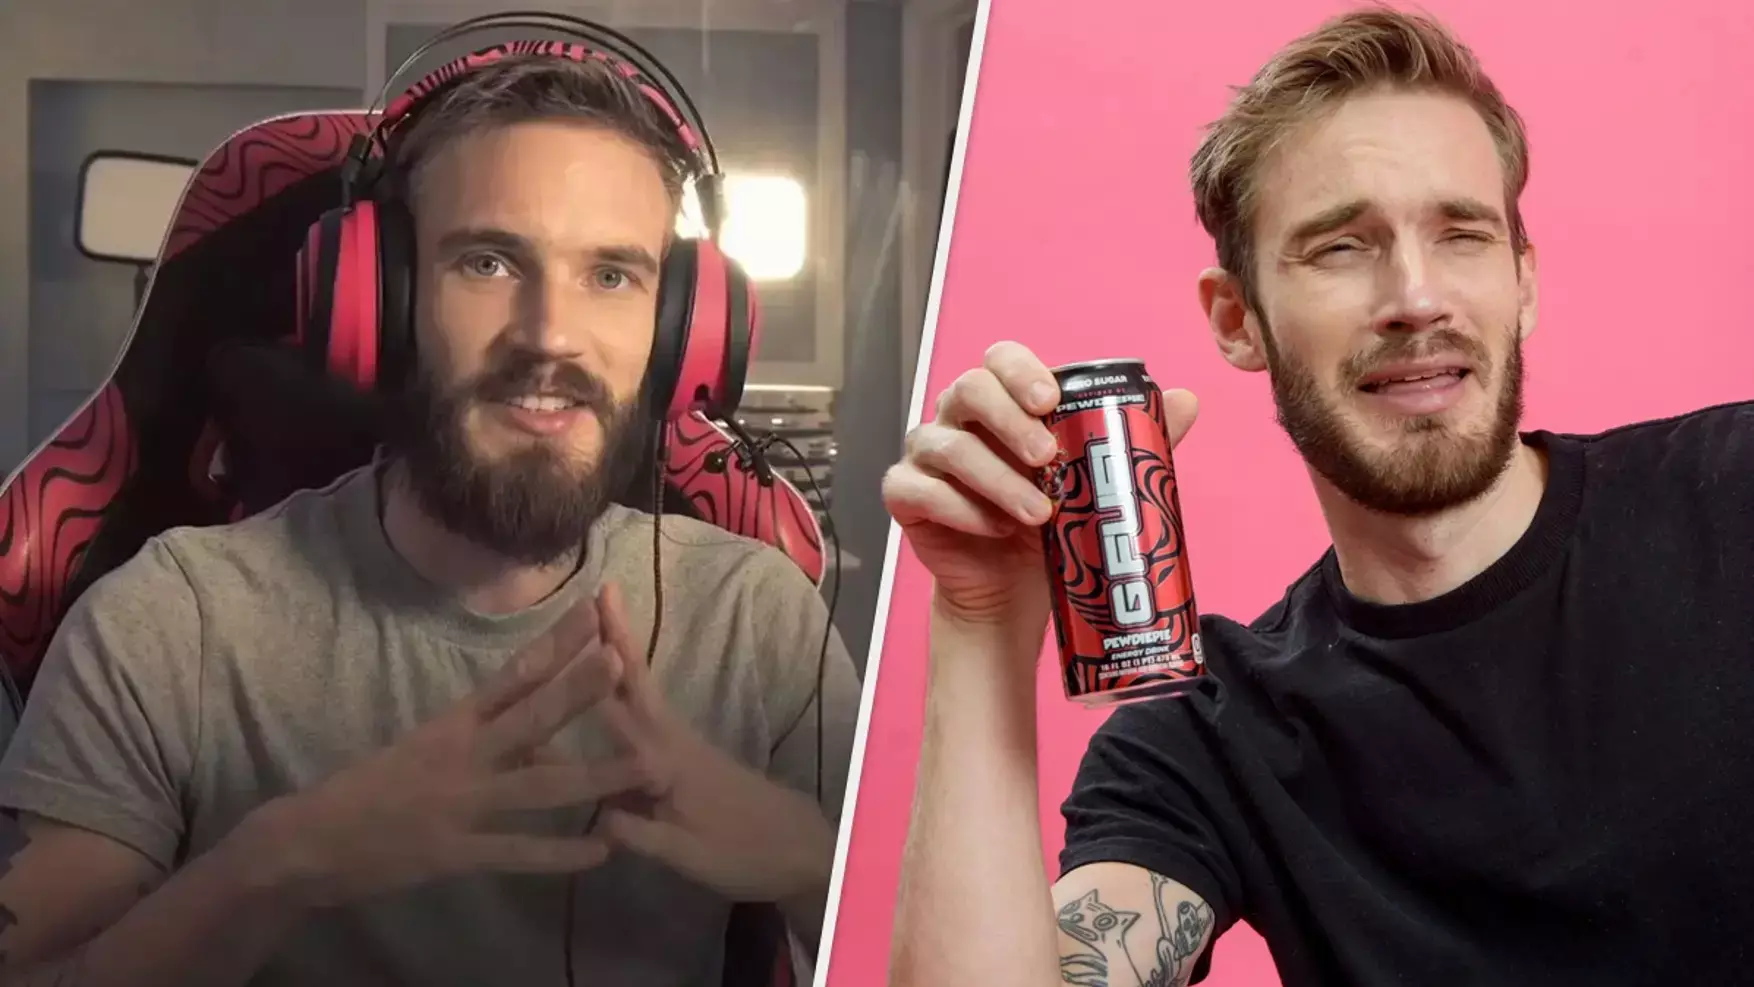 PewDiePie Announces Another Hiatus From YouTube